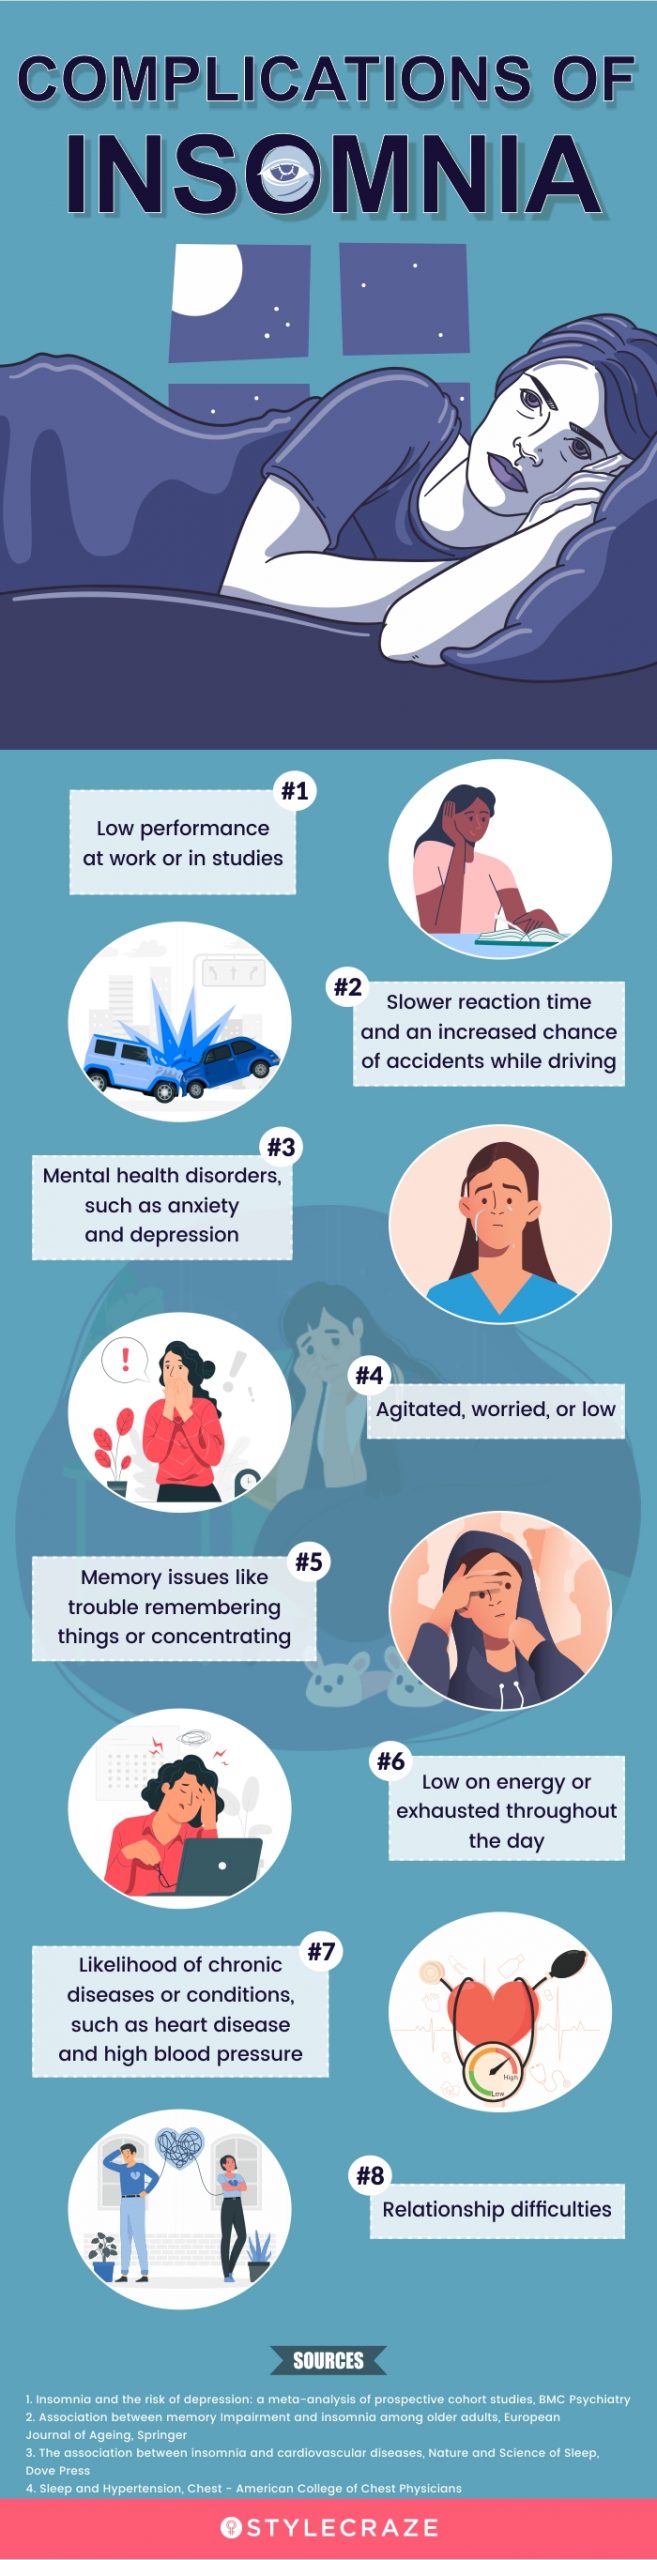 complications of insomnia (infographic)